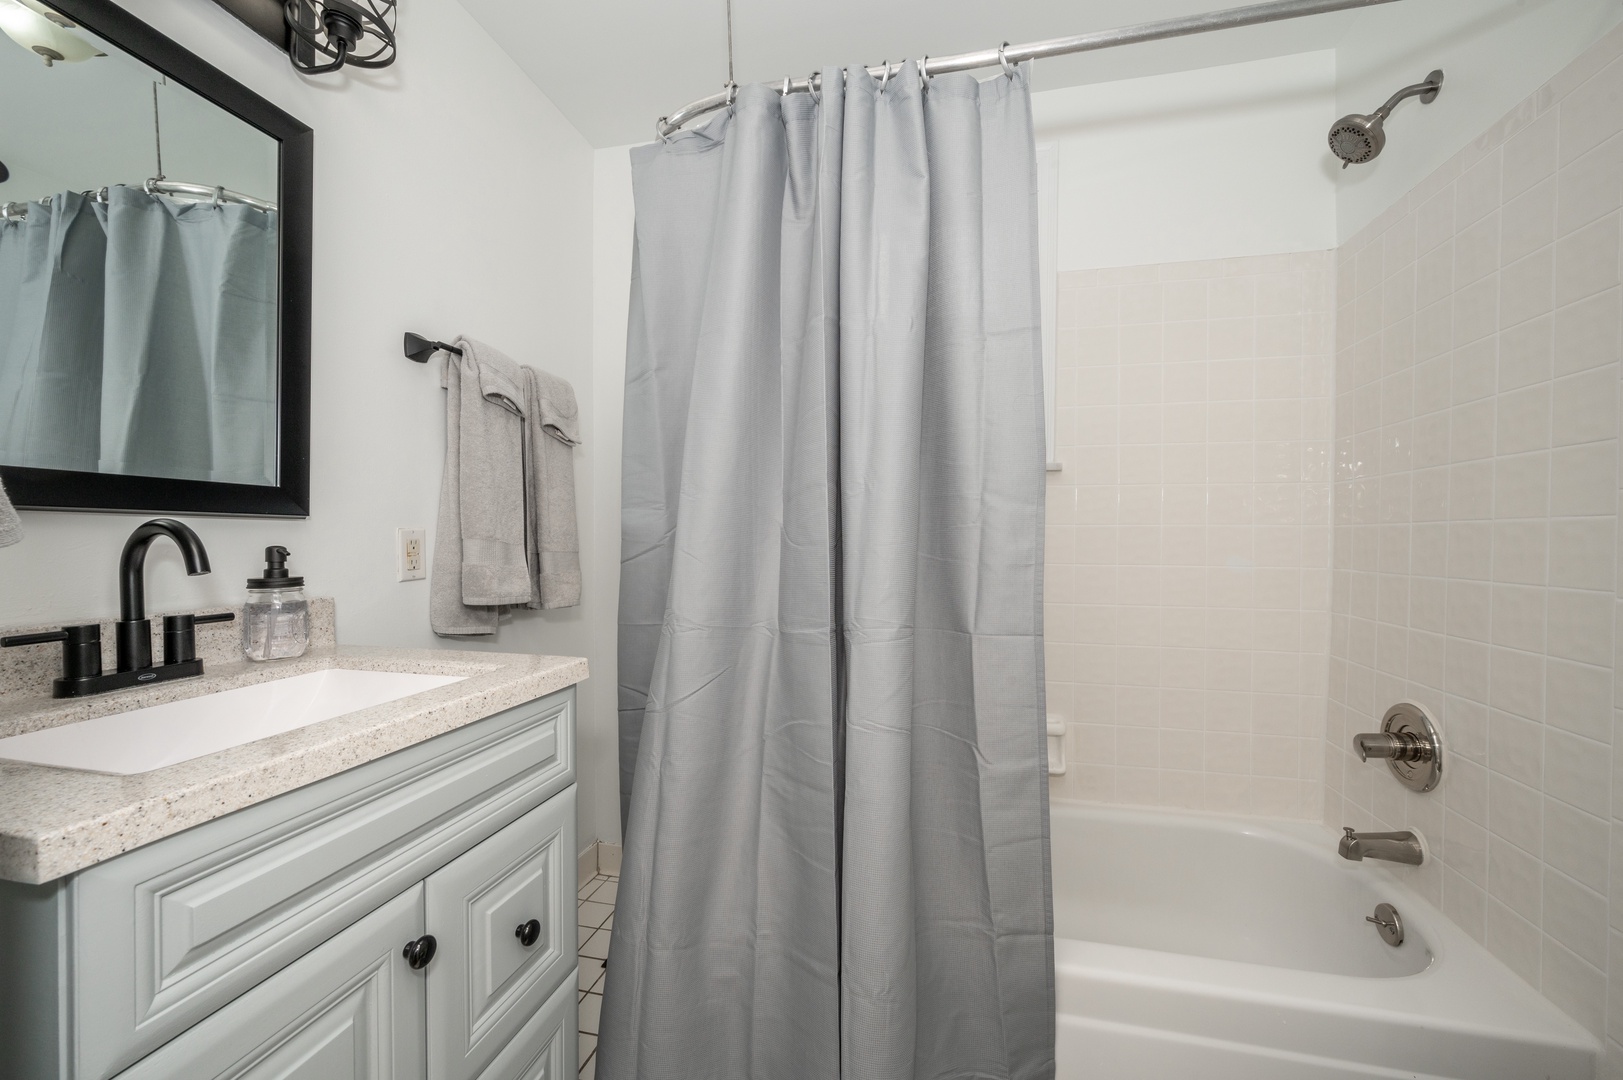 Unit 1 – The full bathroom includes a single vanity & shower/tub combo